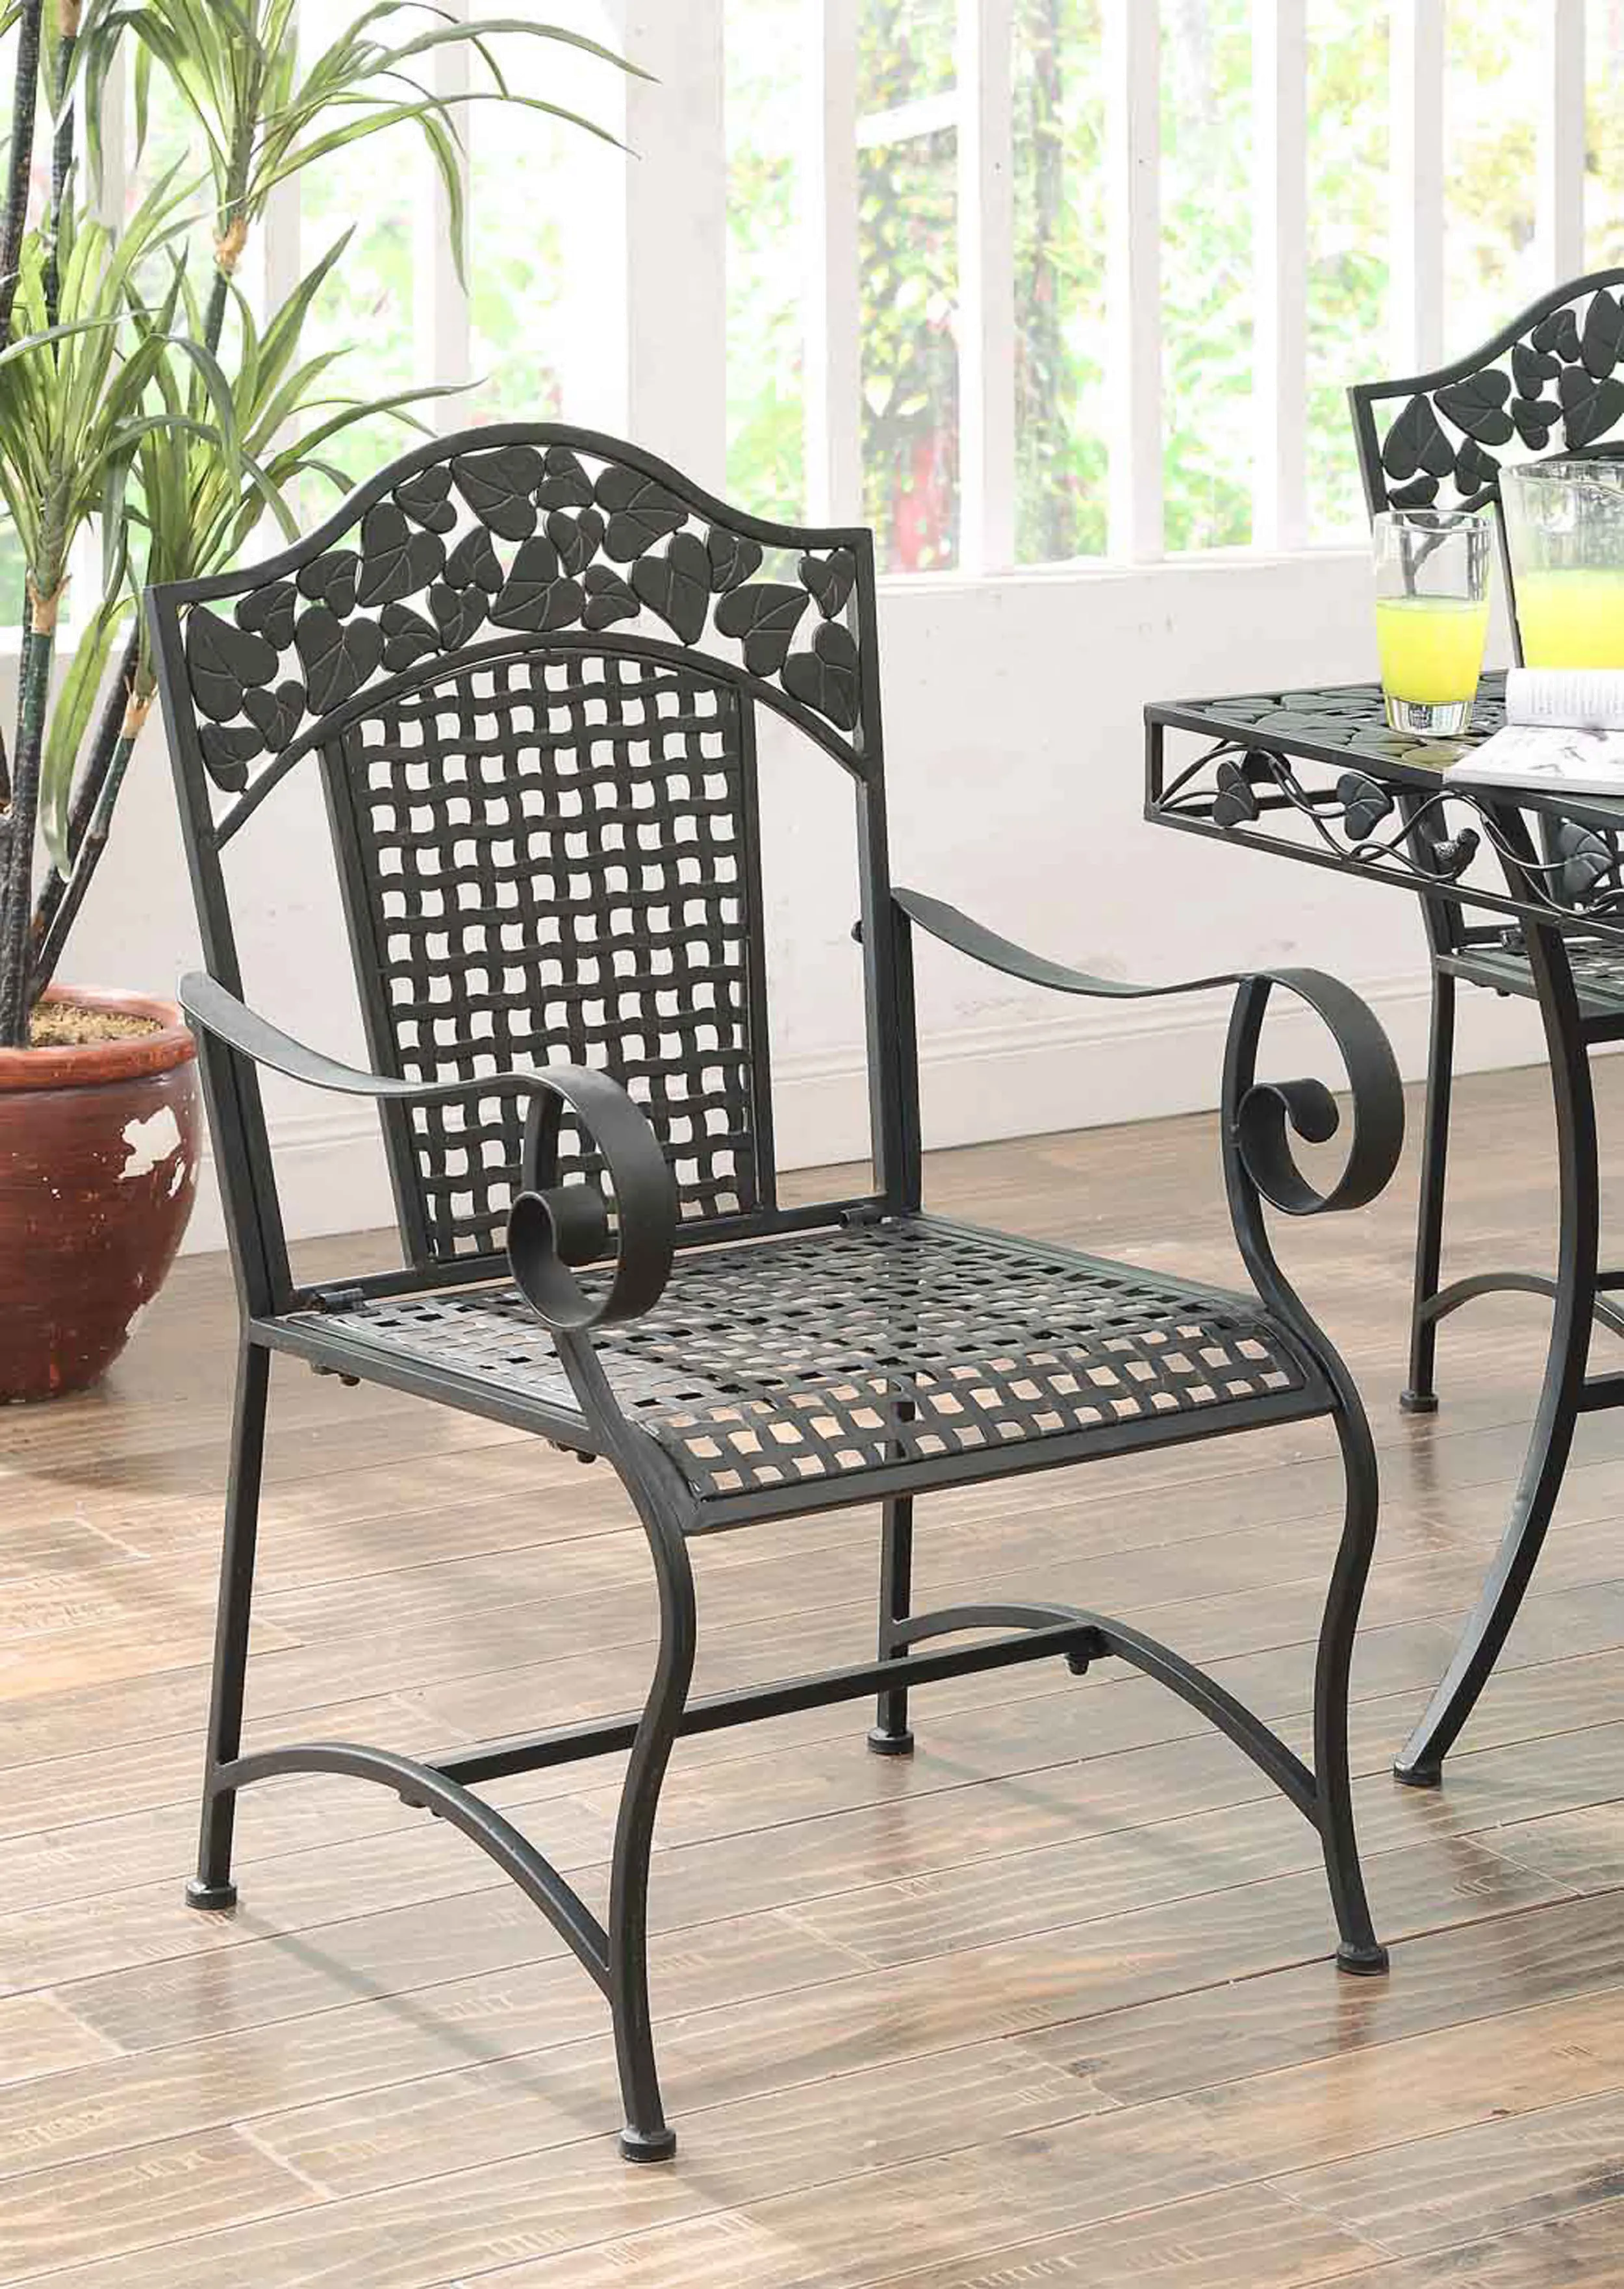 2 Metal Outdoor Patio Chairs - Ivy League